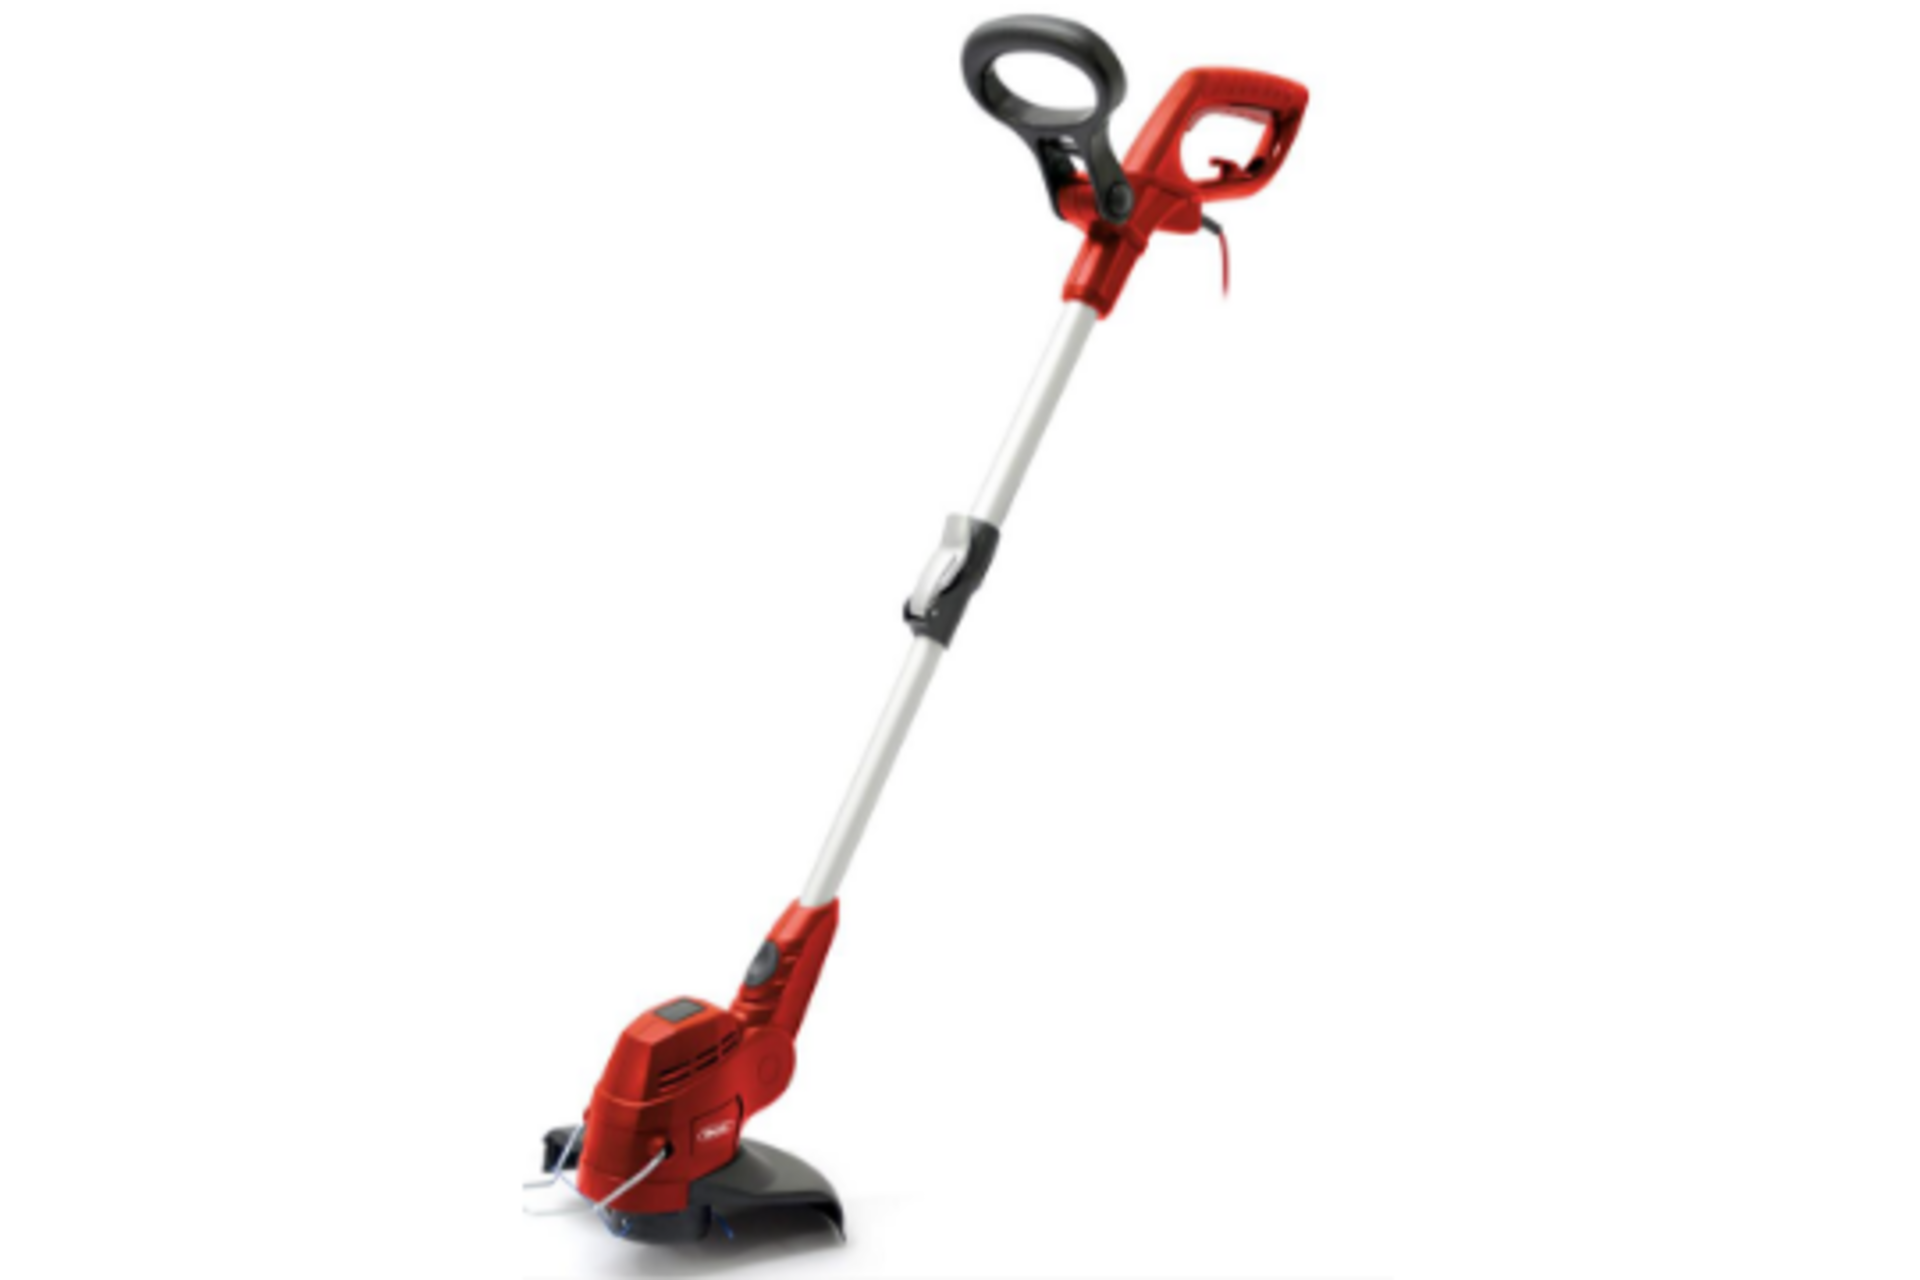 Webb Dynamic 25cm Corded Line Trimmer 450W. - (R51) . Boasting a beefy 450w motor and combining a